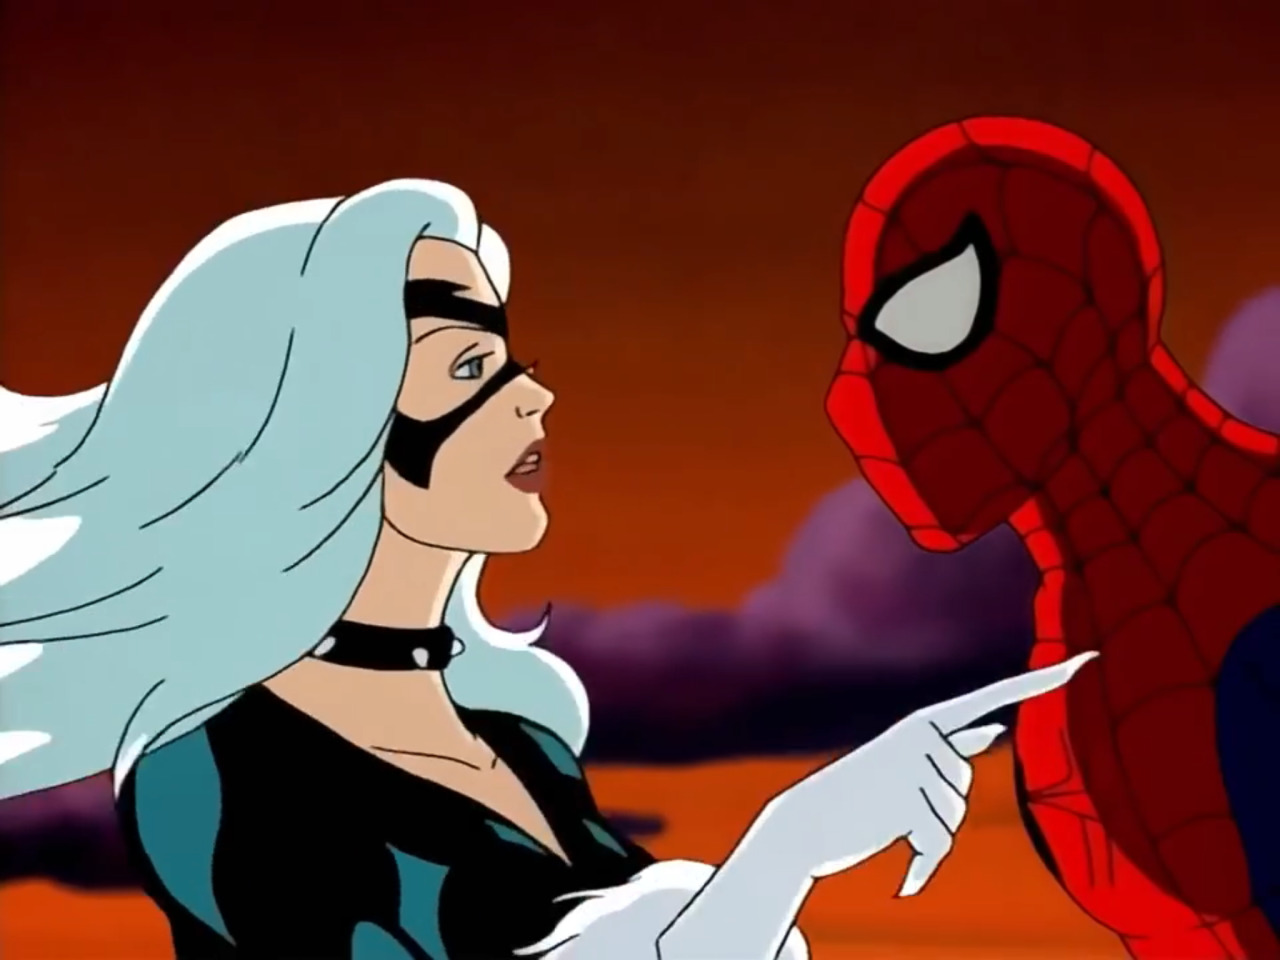 Love is Real — Spider Man and Black Cat's Reunion Kiss.